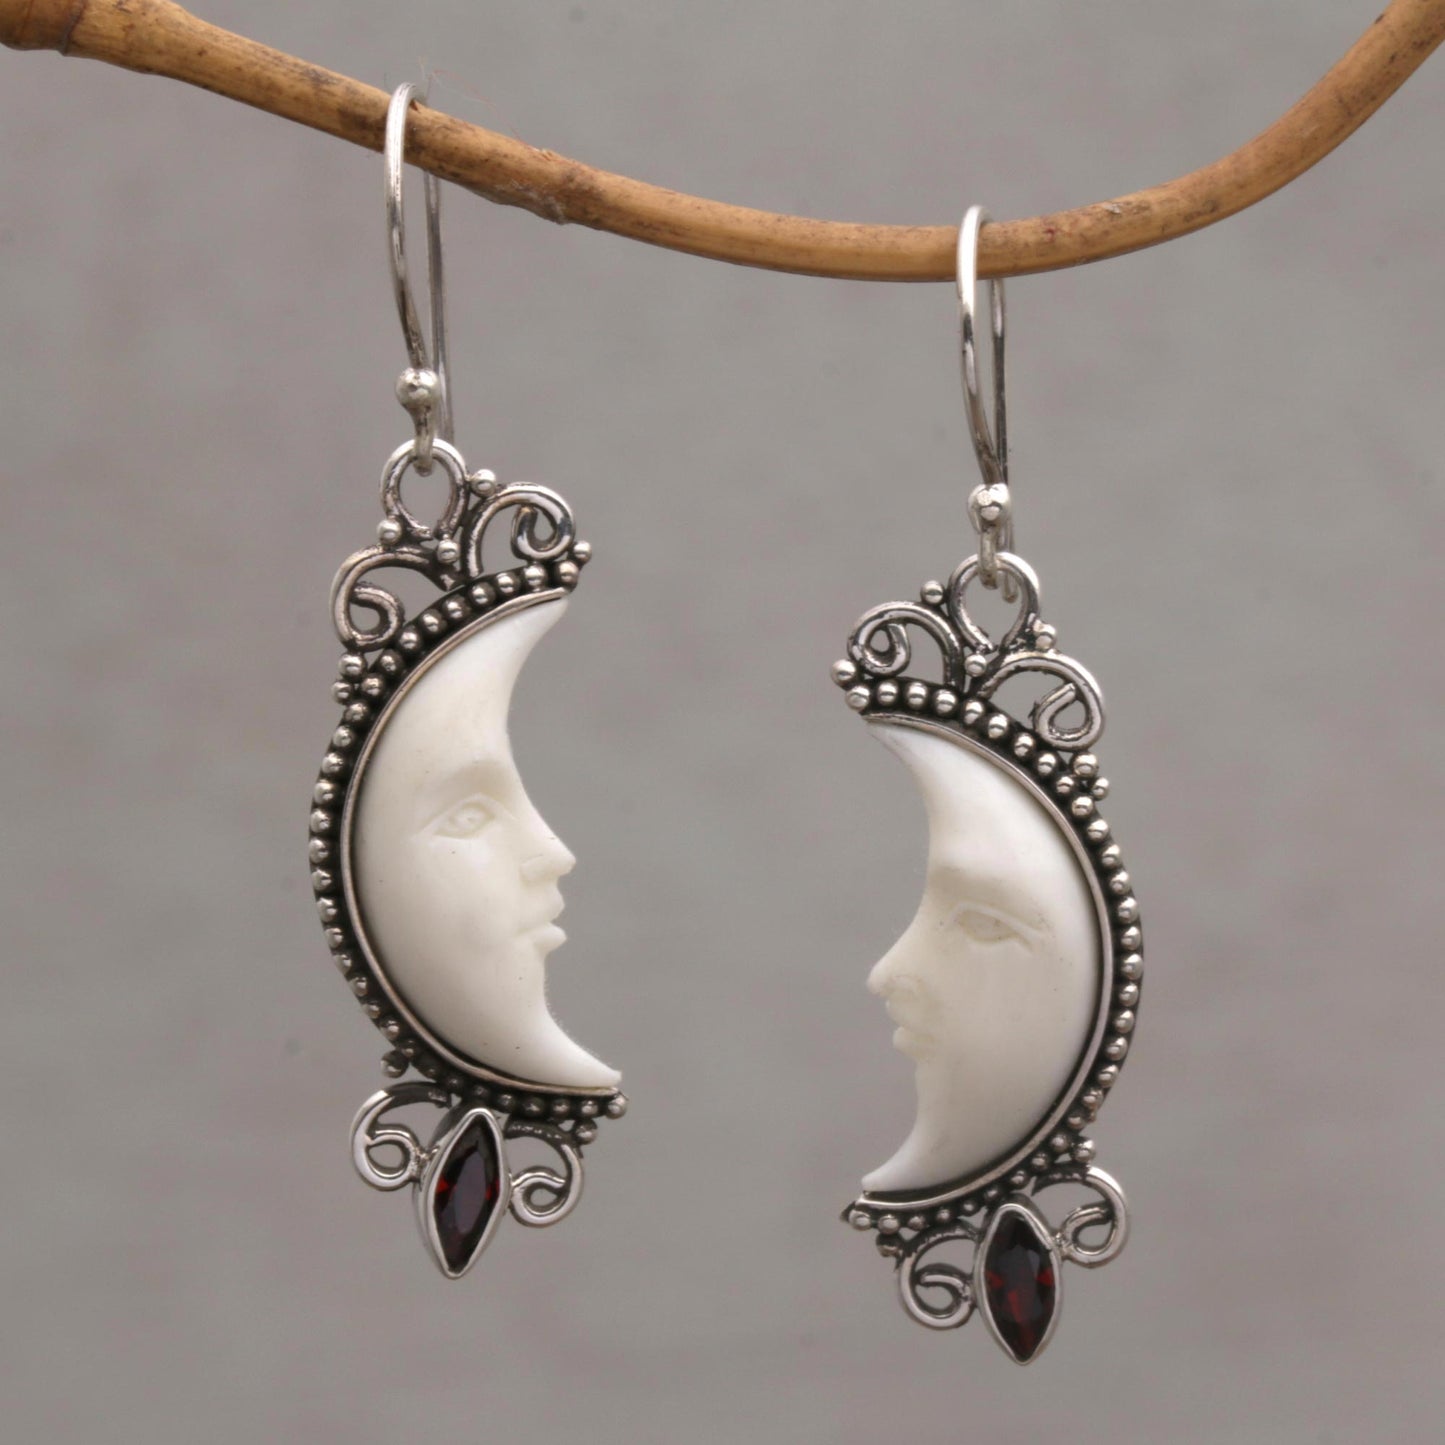 Natural Moonlight Garnet and Silver Crescent Moon Dangle Earrings from Bali